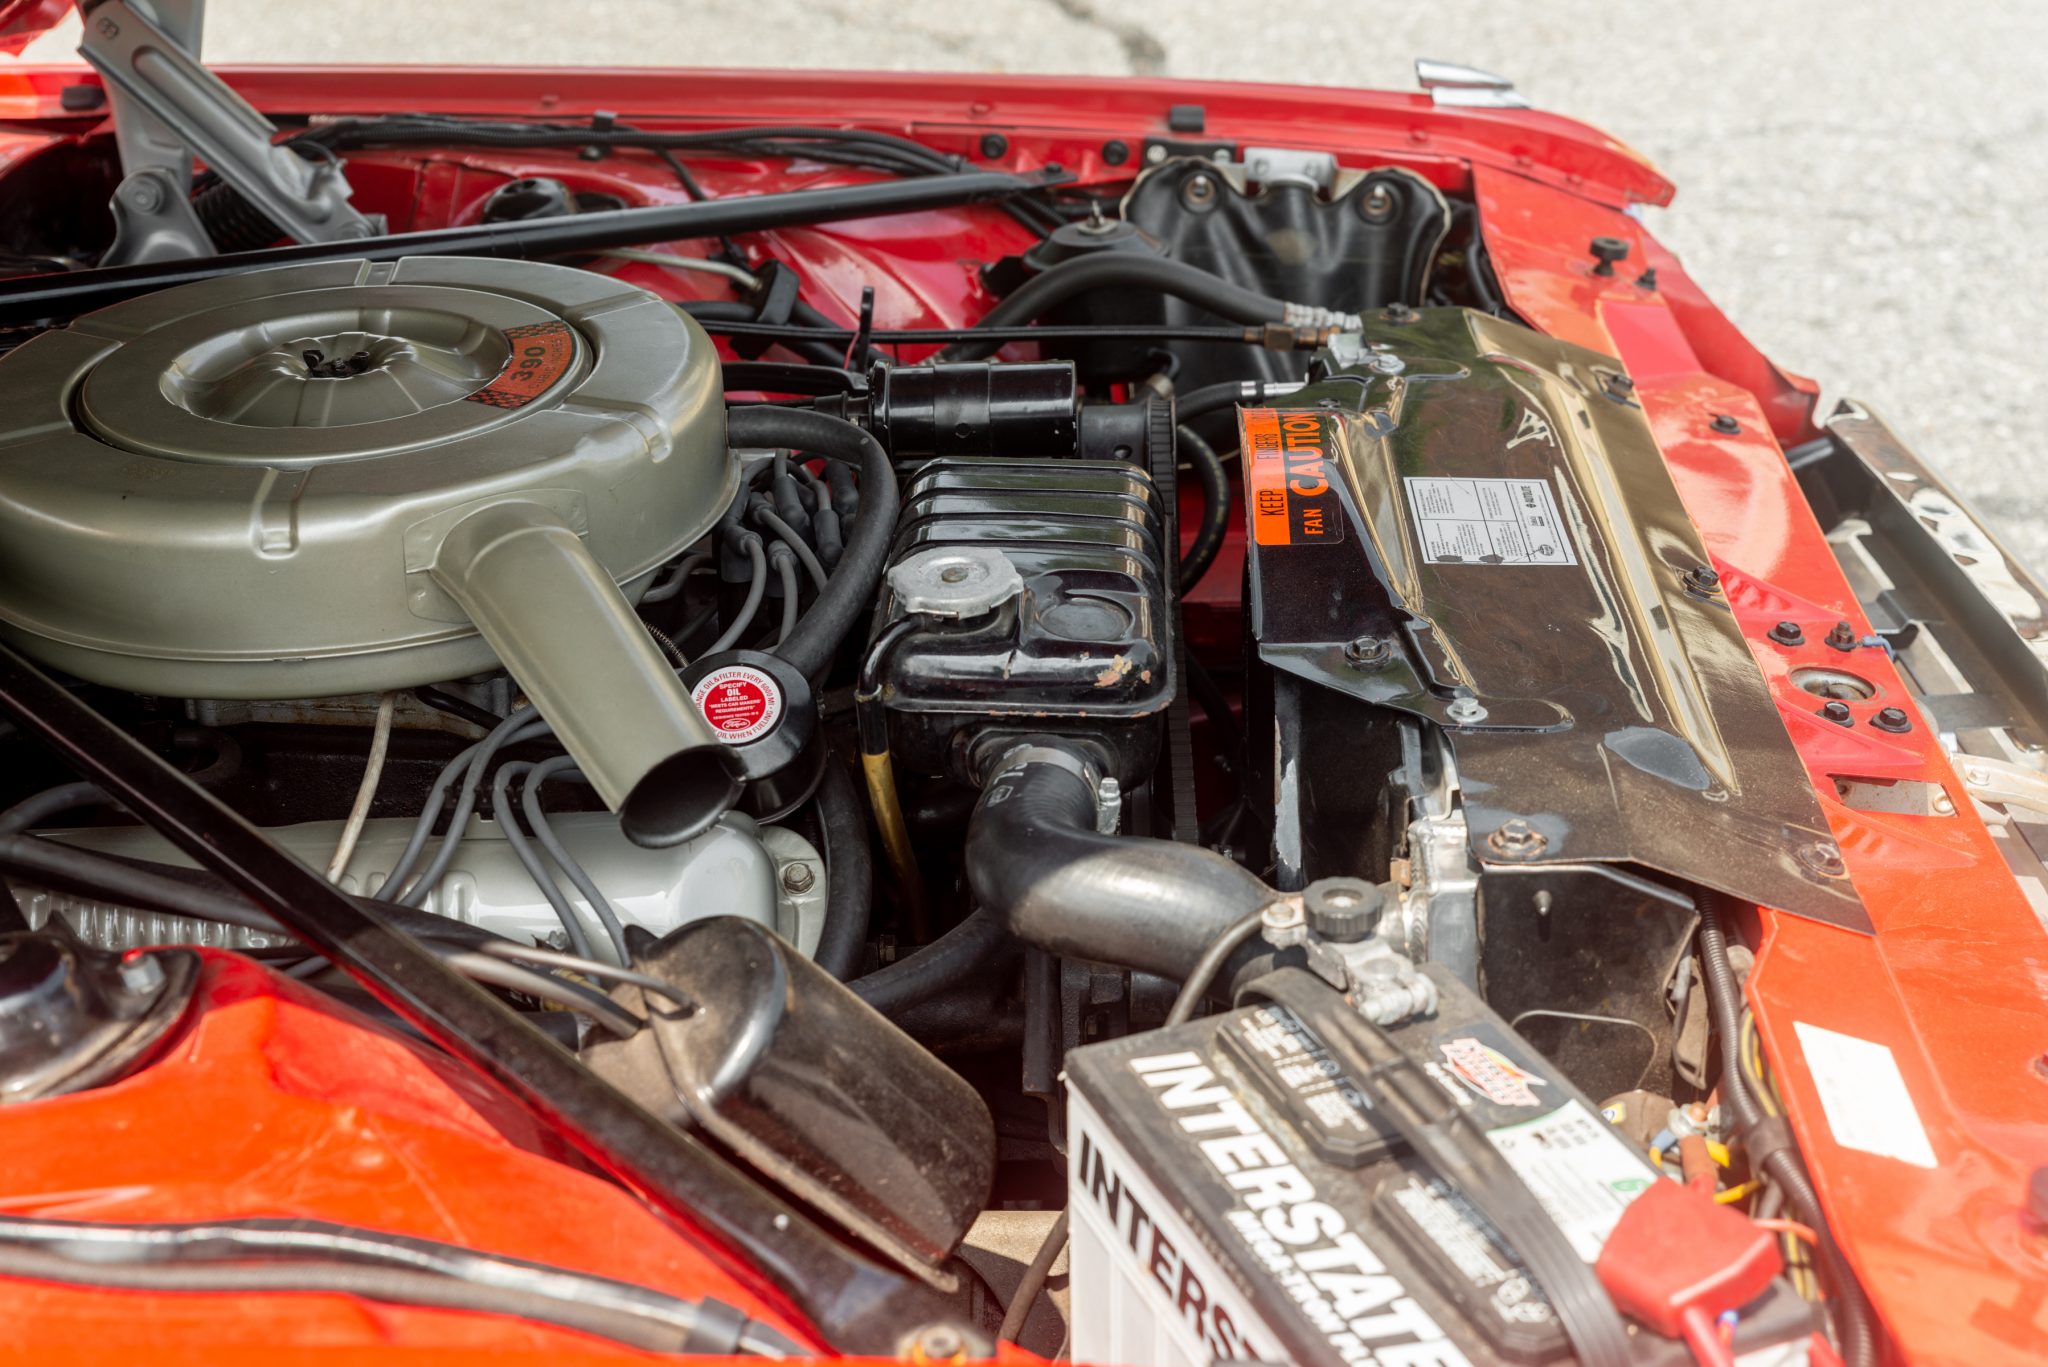 1964 Red Ford Thunderbird Convertible Engine Bay